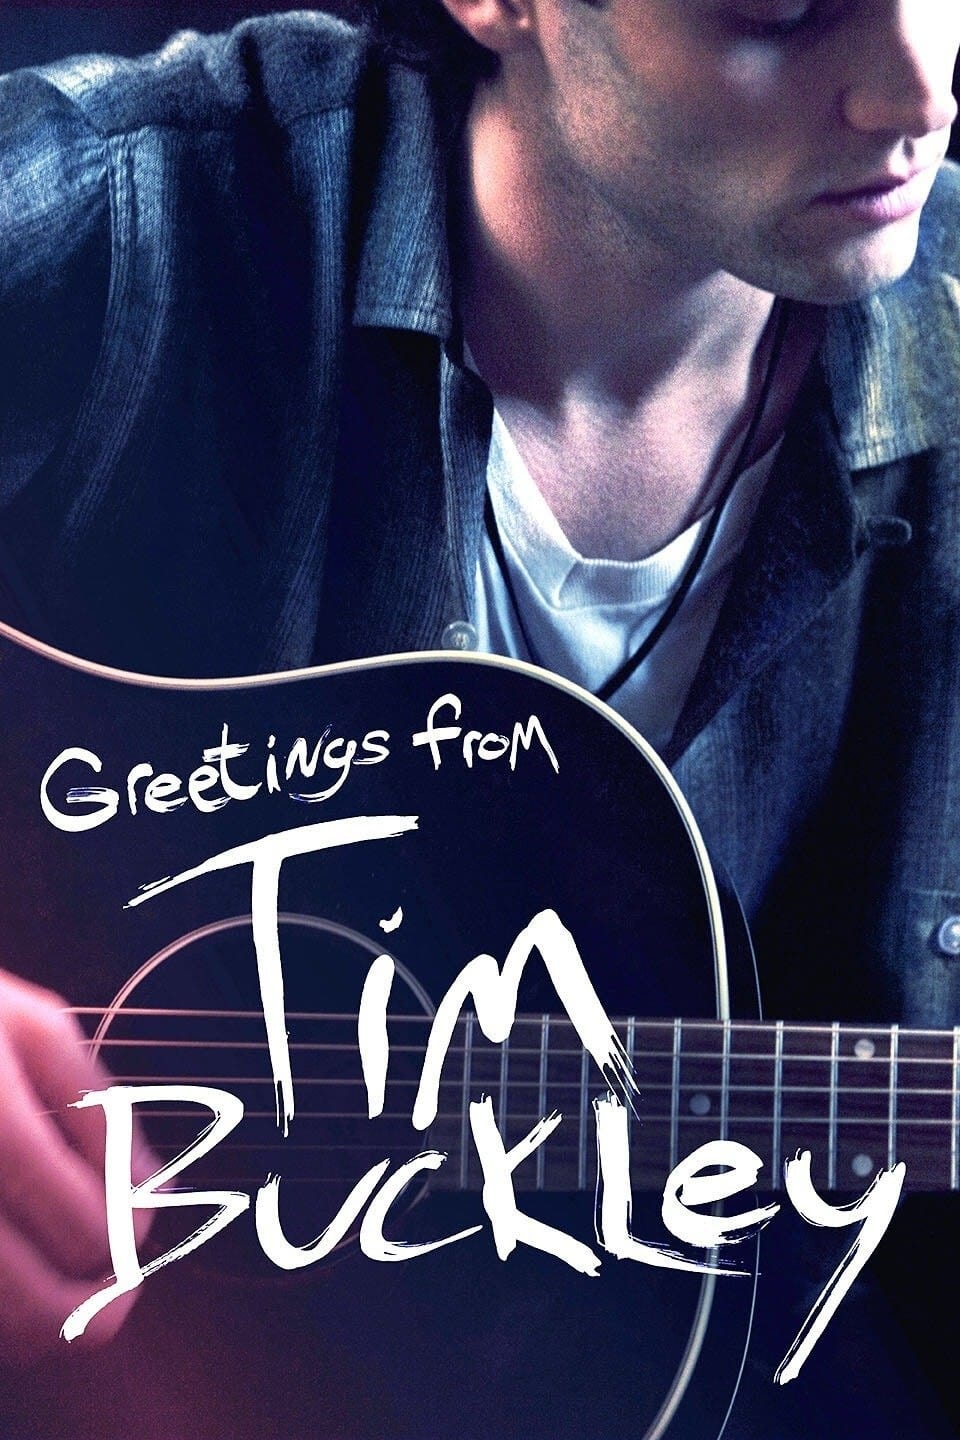 Greetings from Tim Buckley (2013)